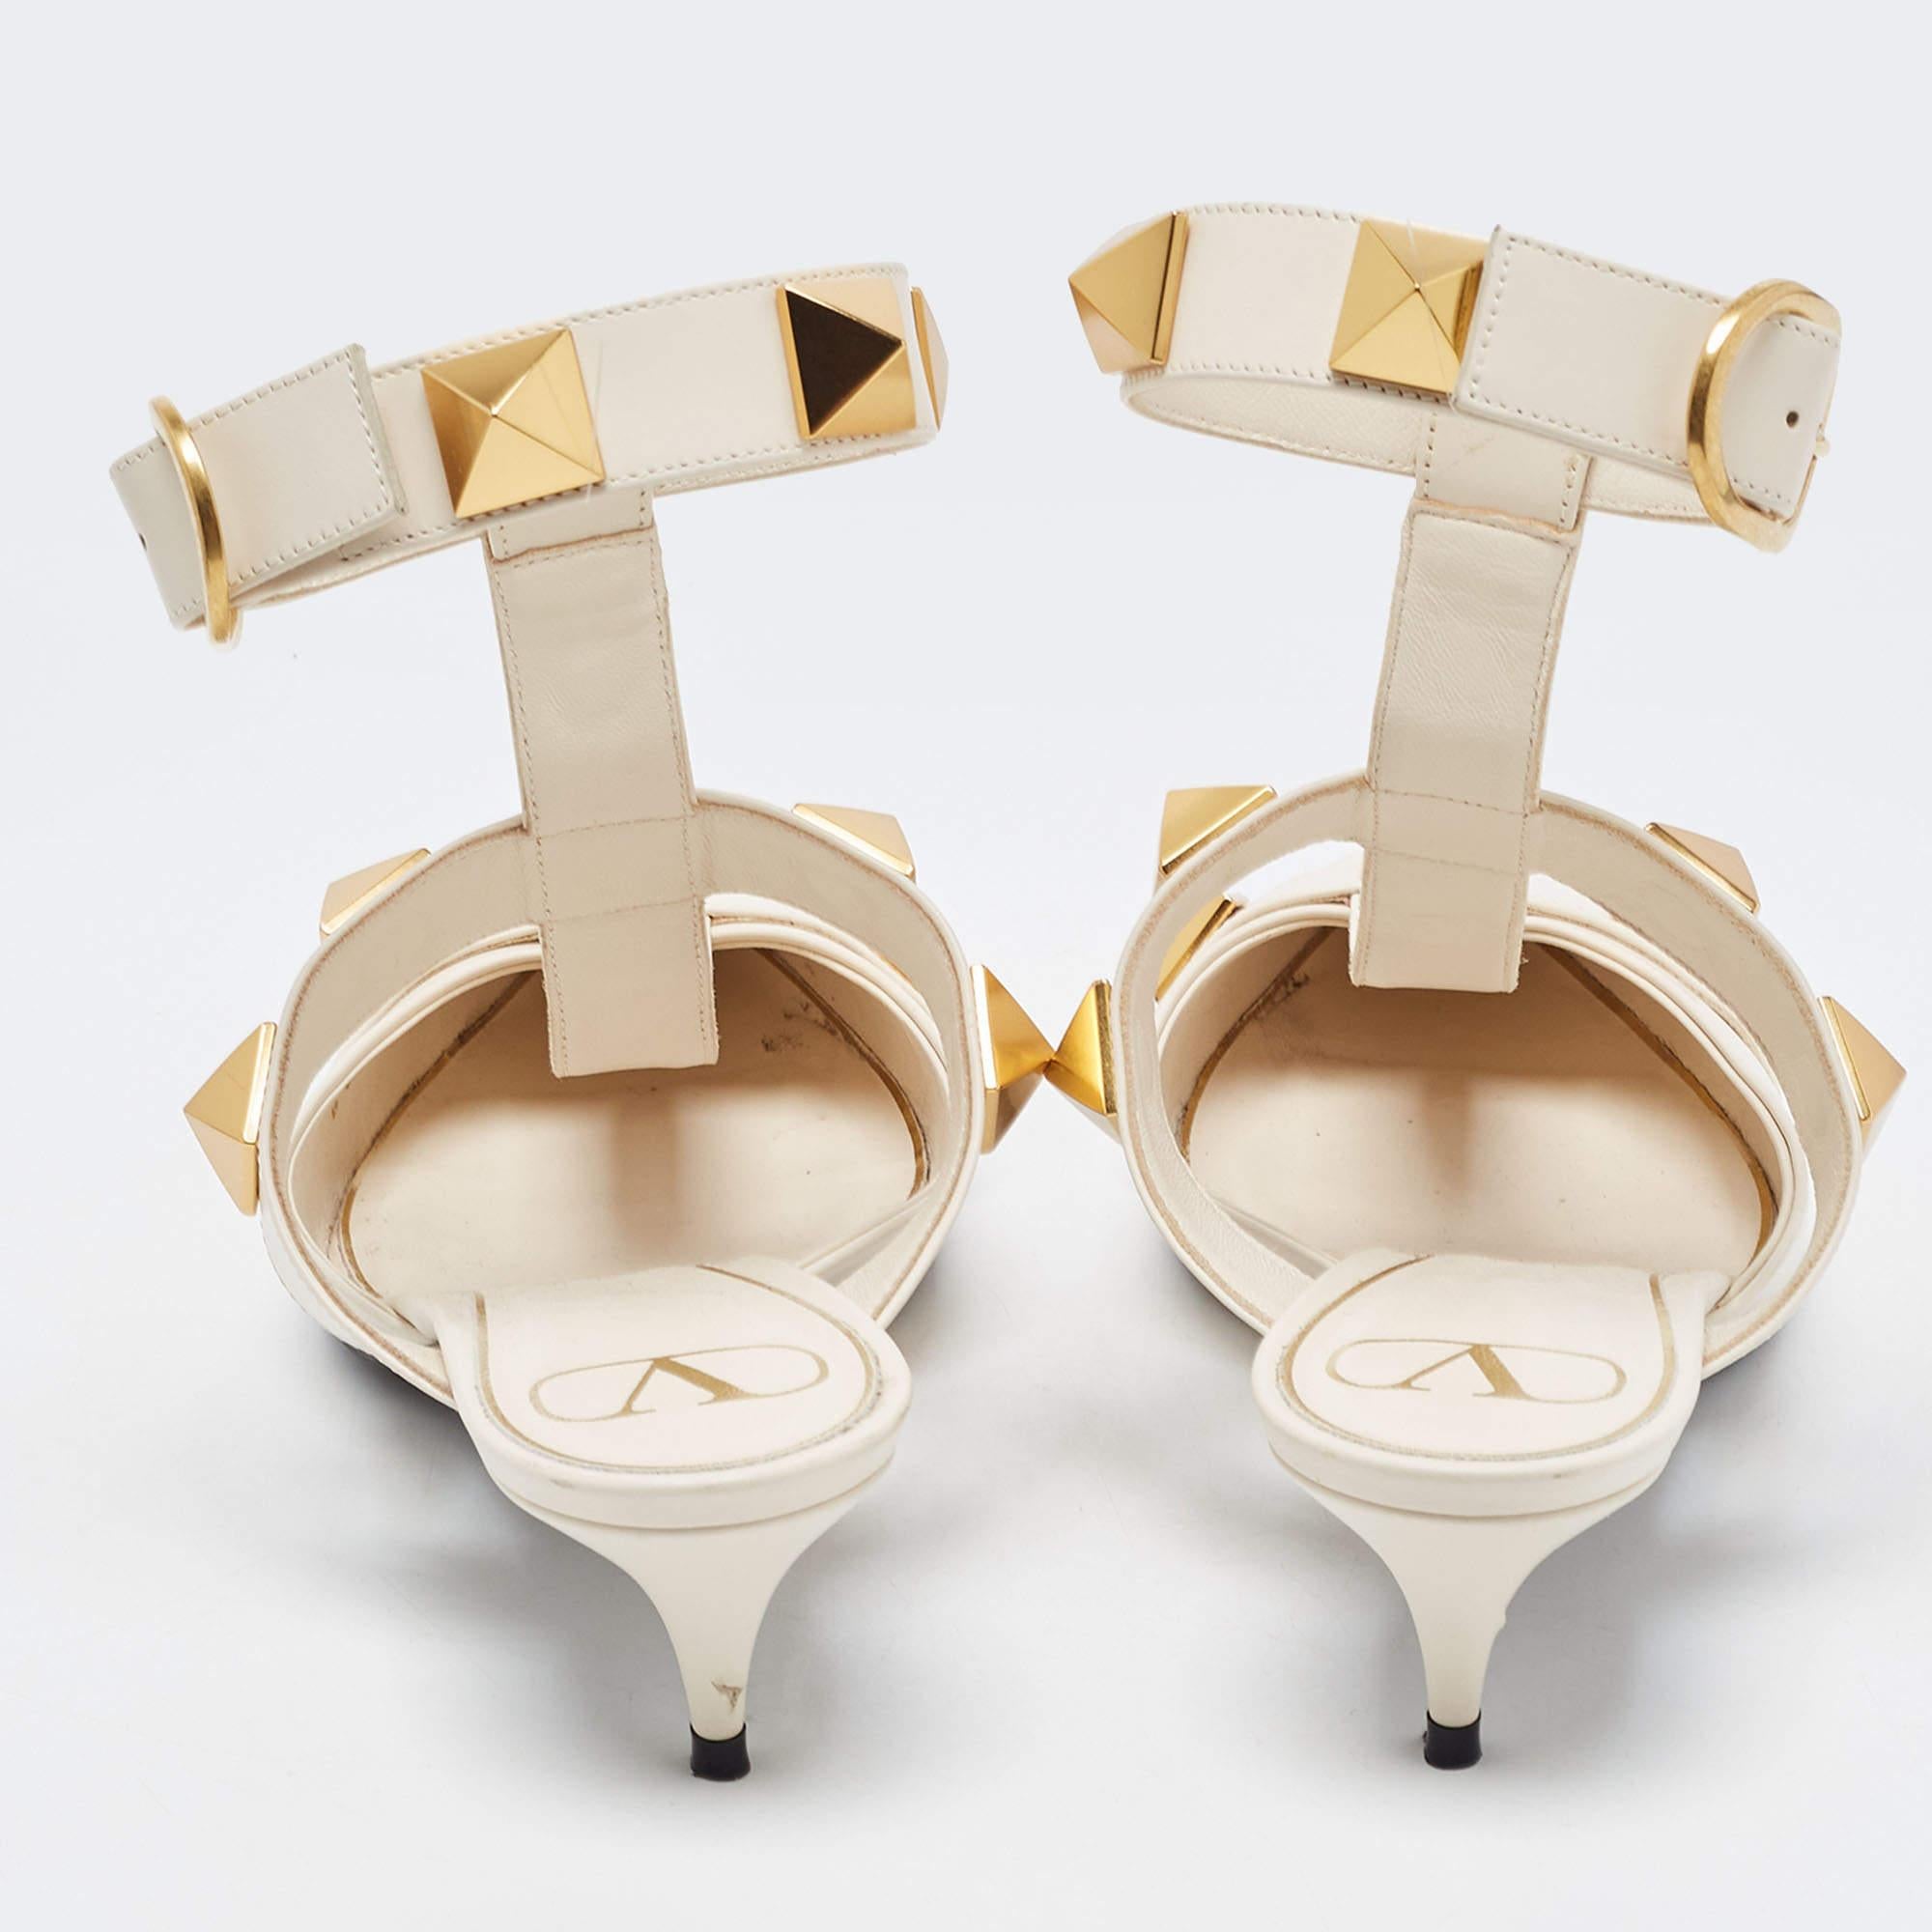 Valentino shoes are known for their unique designs that emanate the label's feminine verve and immaculate craftsmanship that makes their creations last season after season. Crafted from leather in a versatile cream shade, the straps are adorned with